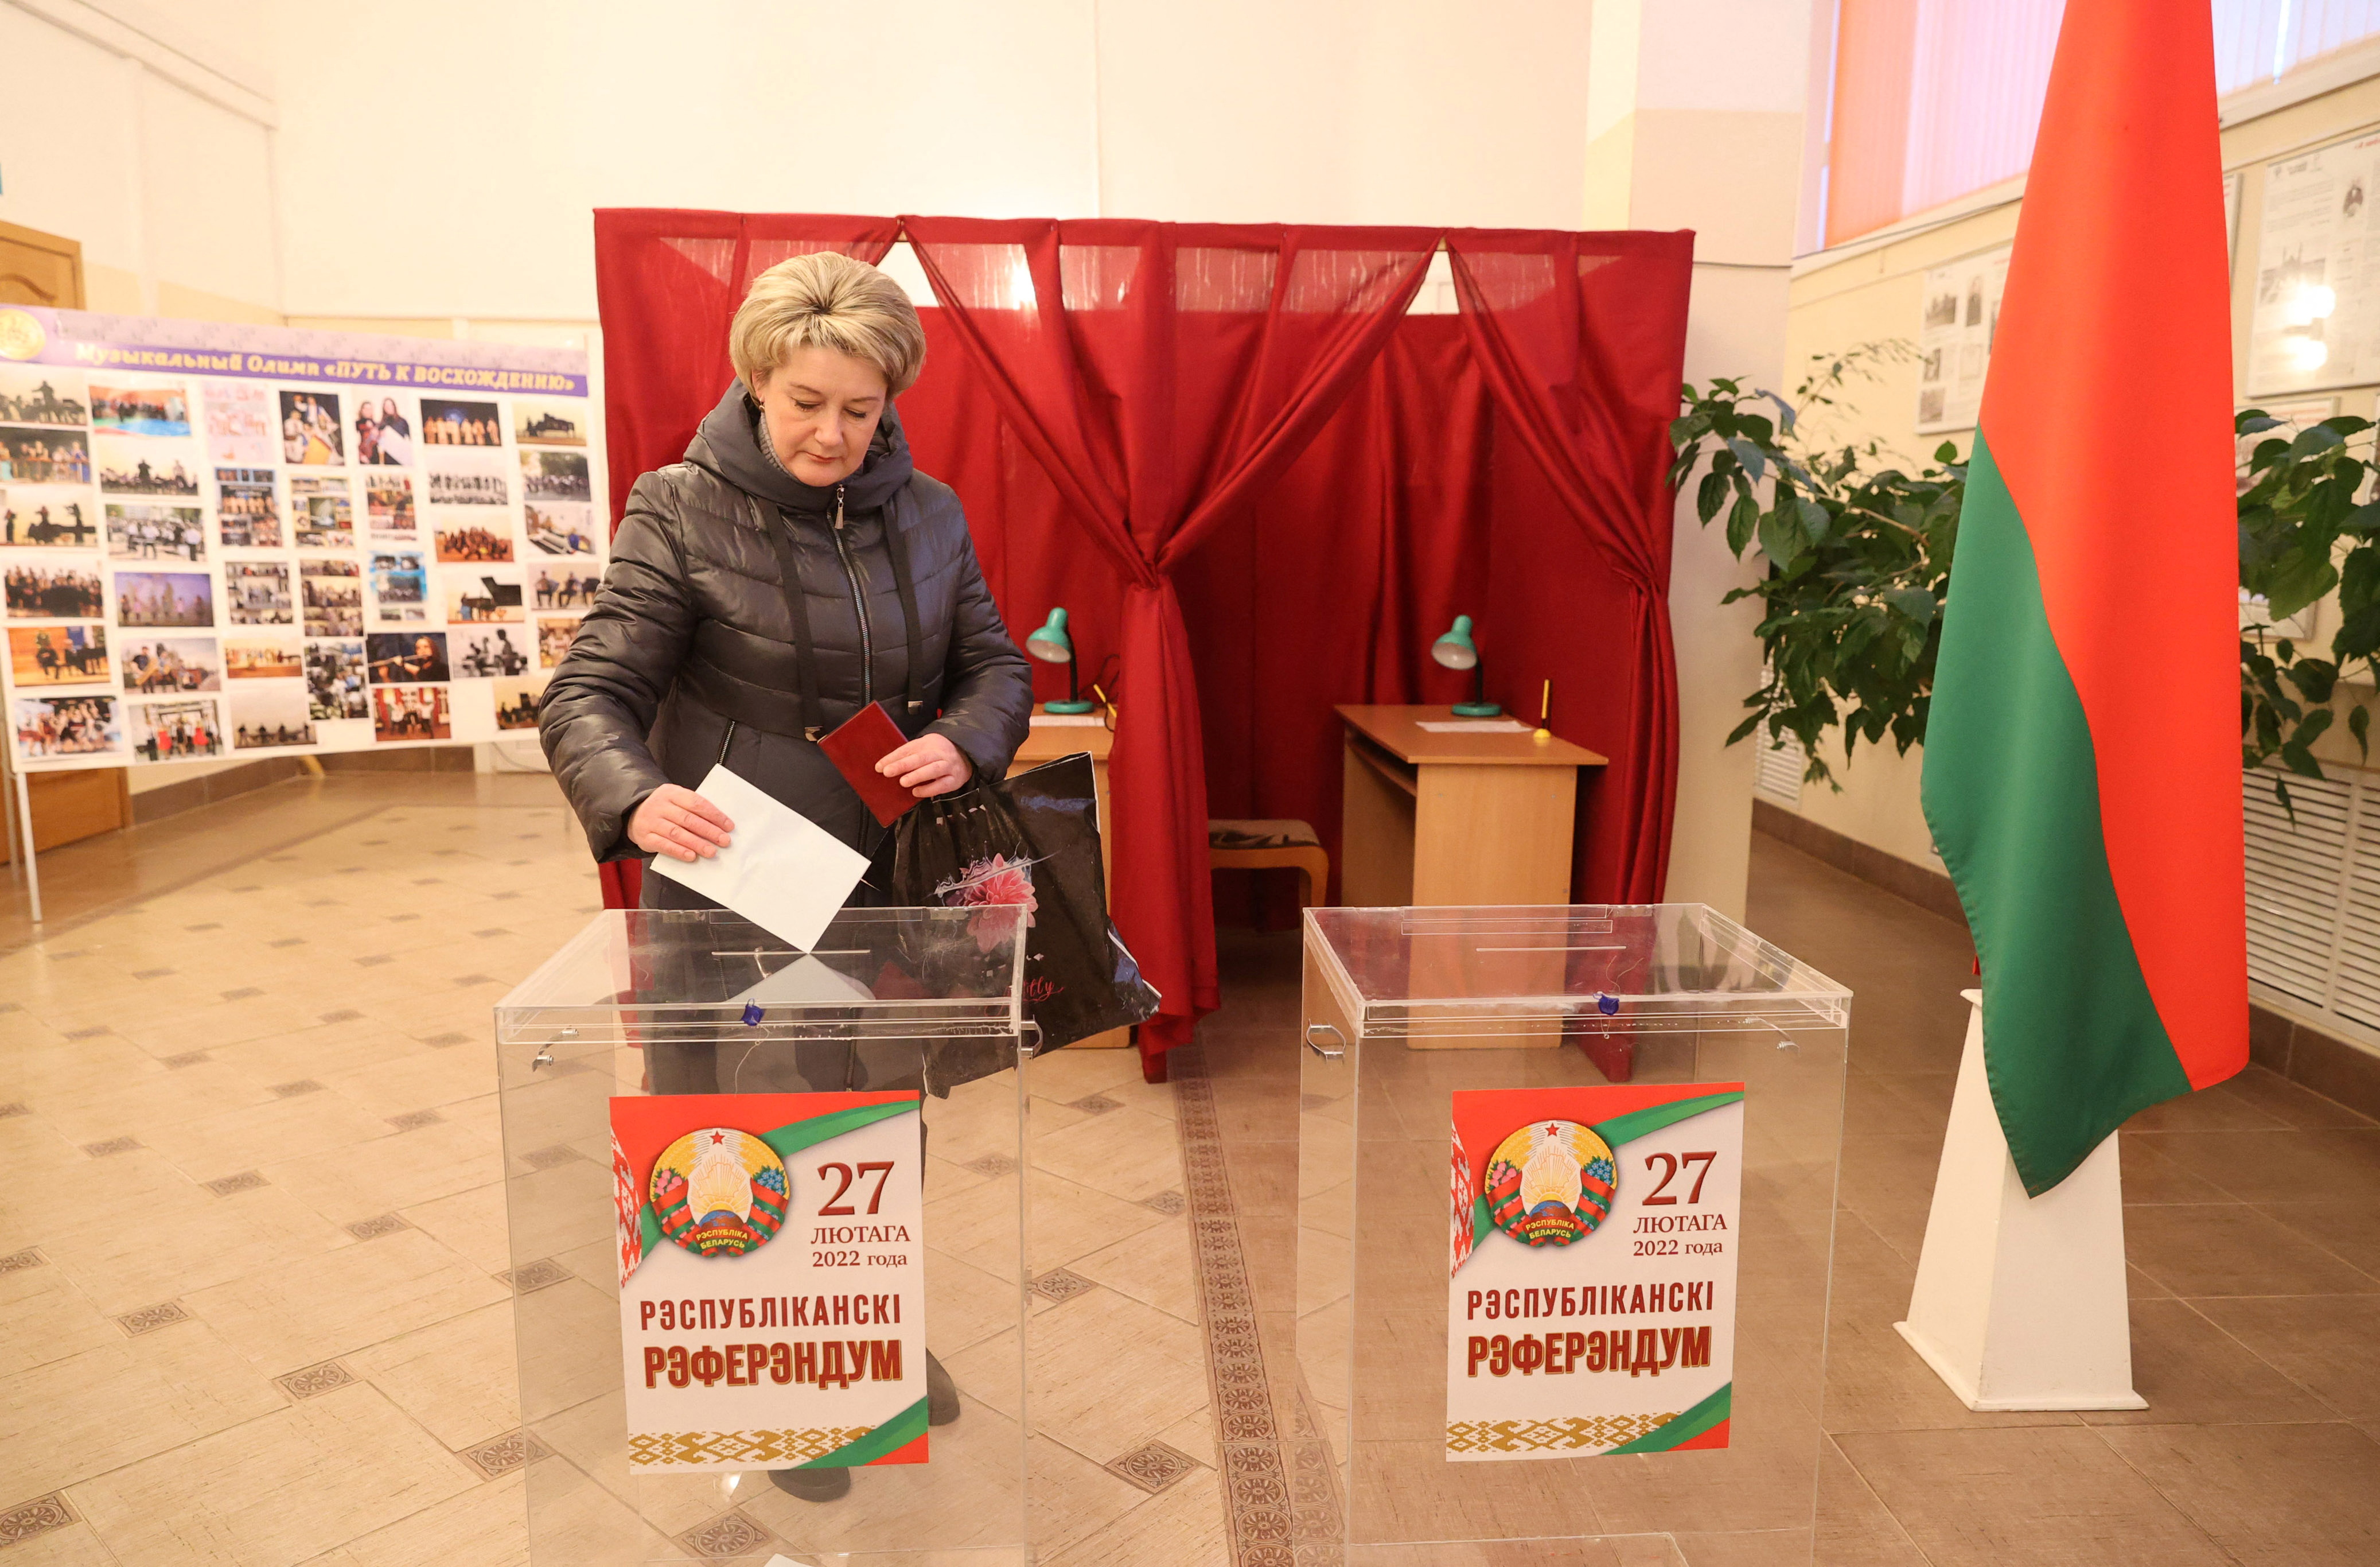 A woman casts her ballot at the constitutional referendum in Vitebsk